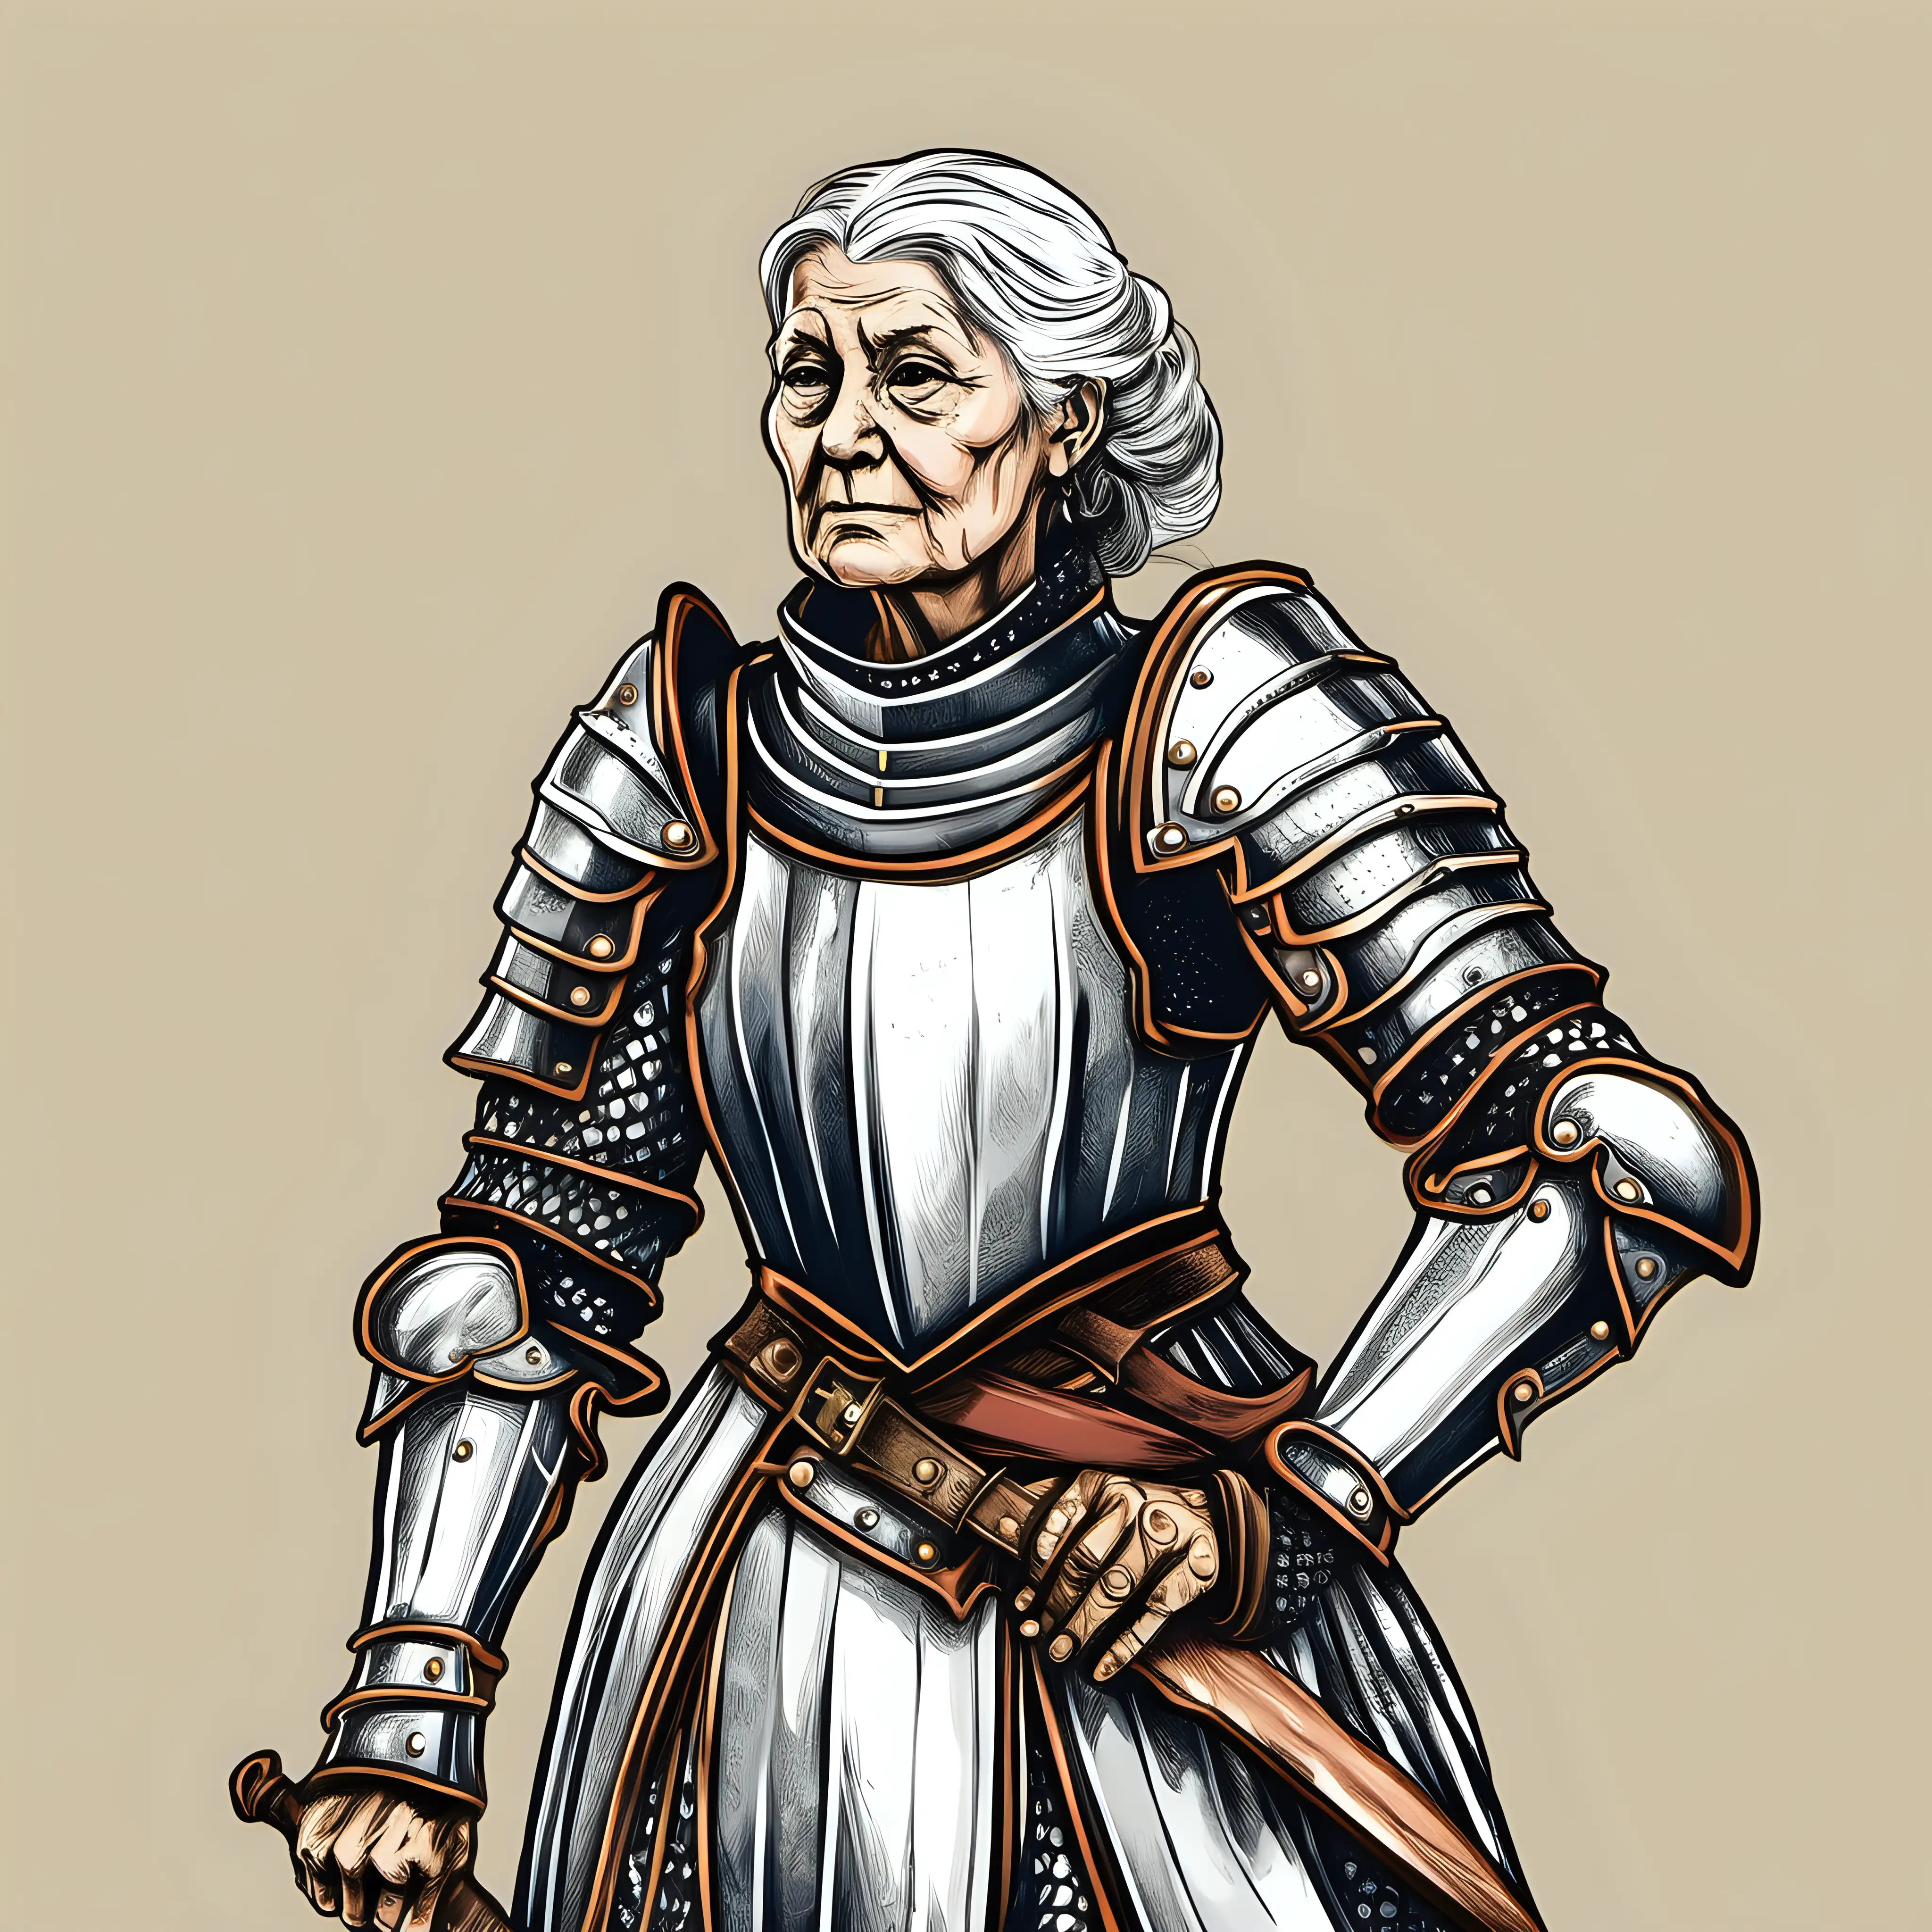 historical landsknetch elderly female wearing 
historical plate armor in hand drawn style

